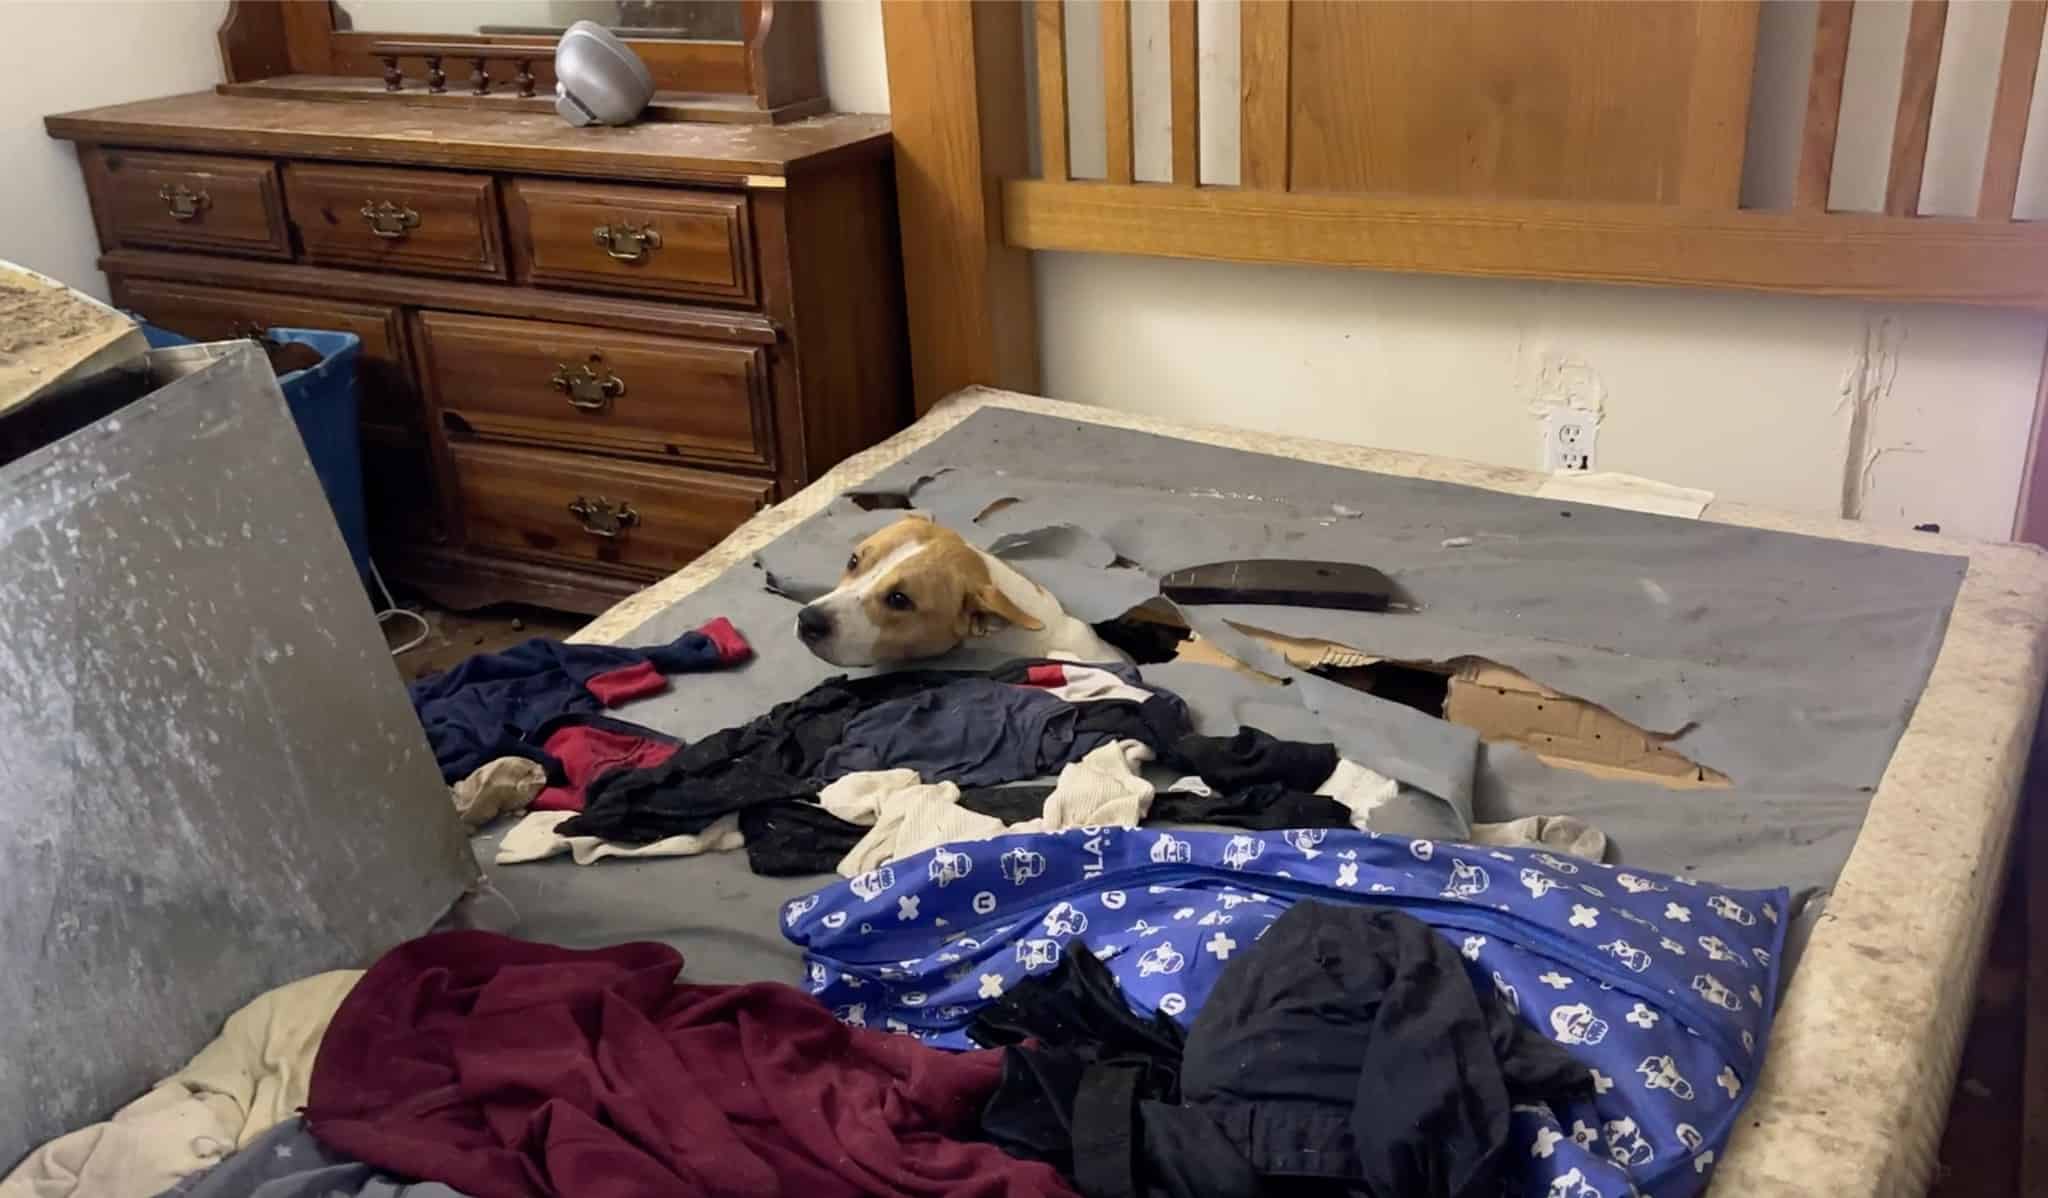 dog in a messy room